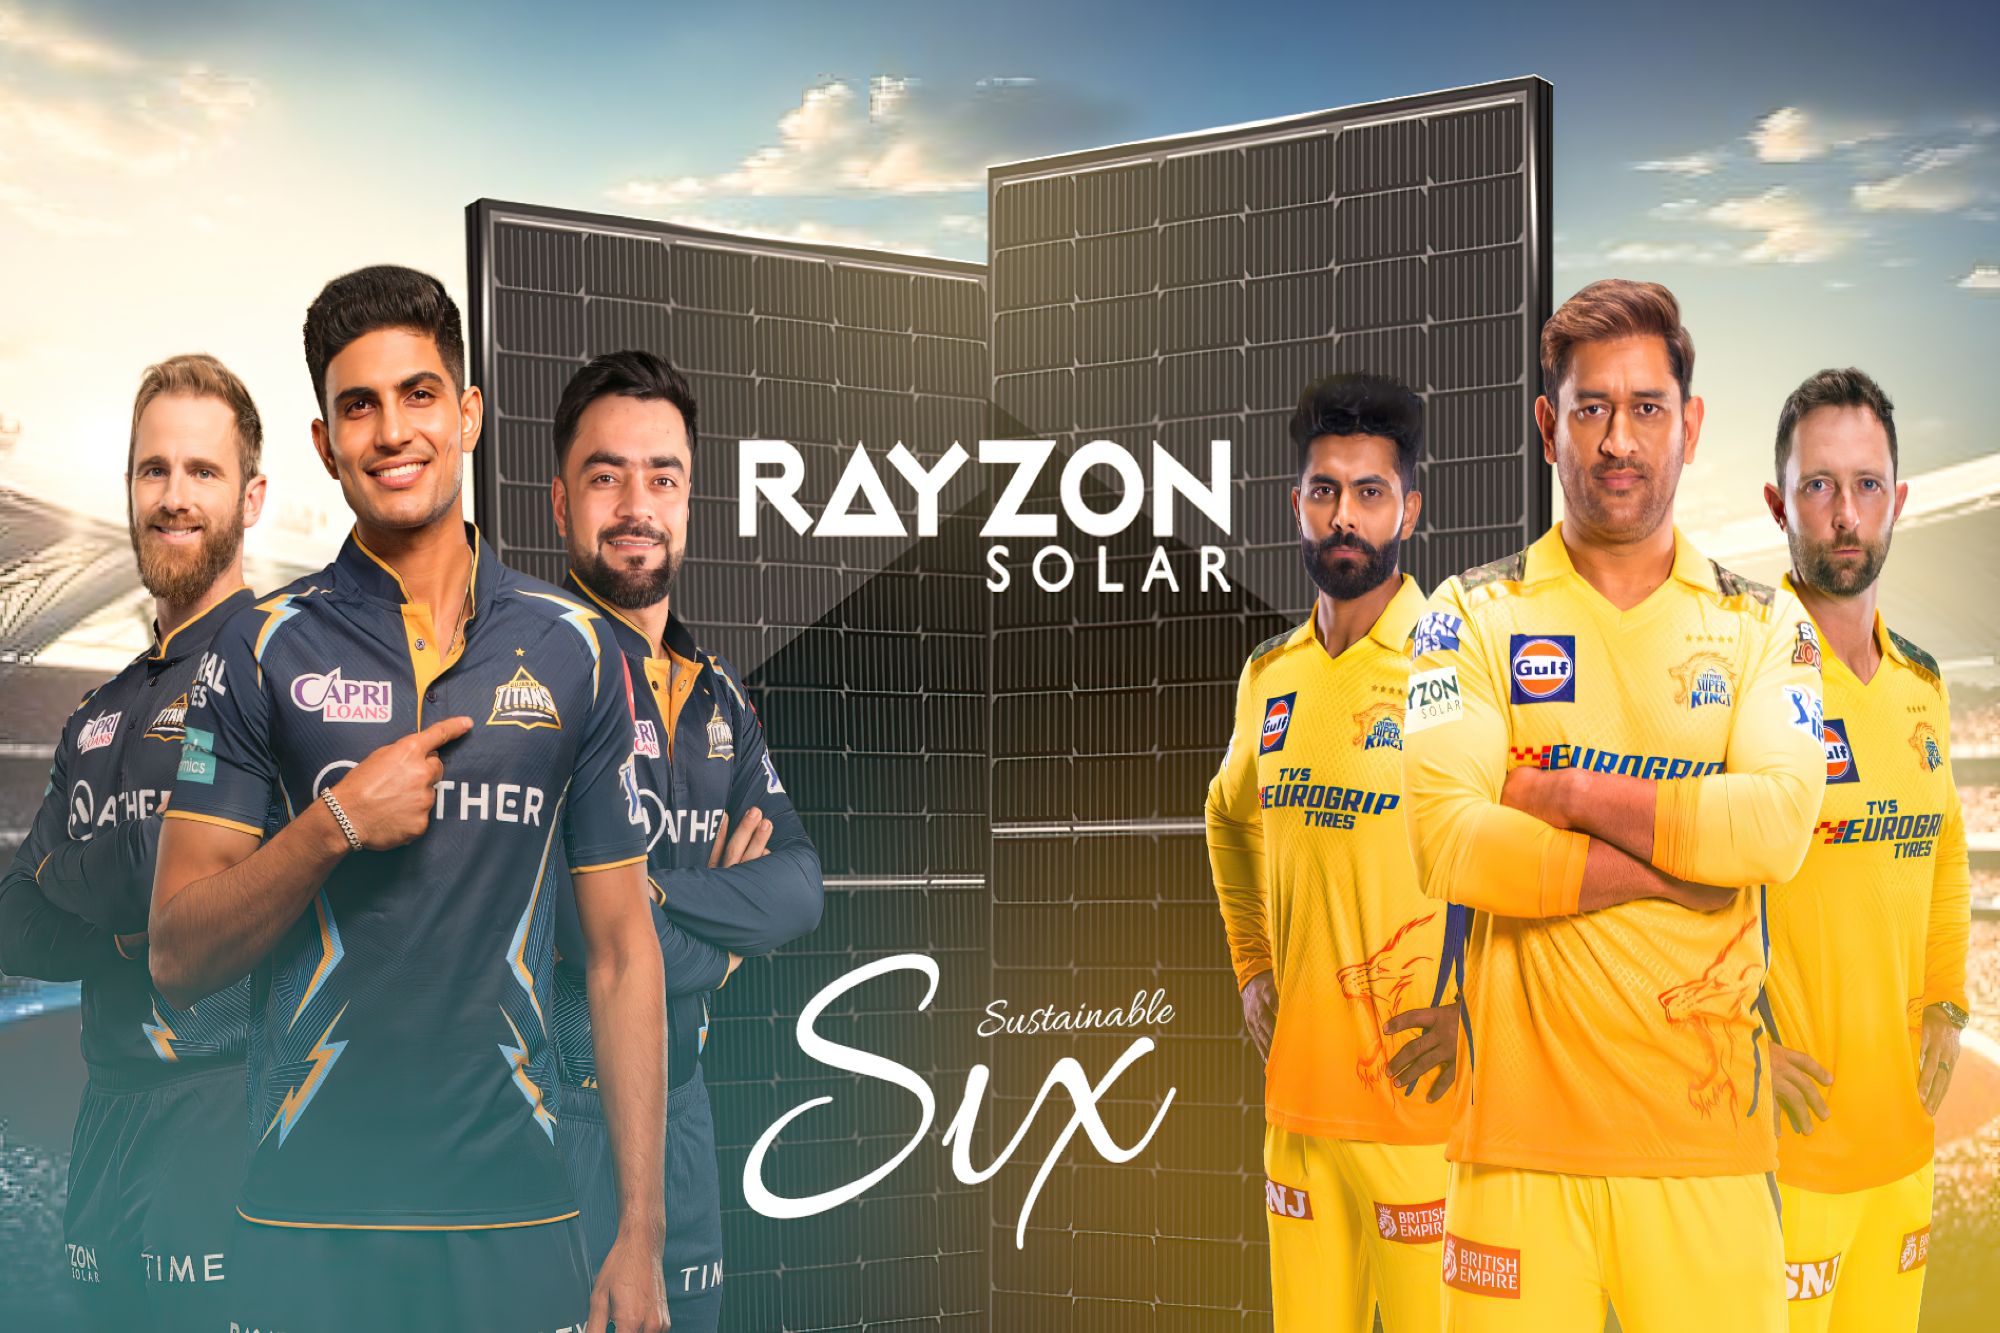 Rayzon Solar, Chennai Super Kings, and Gujarat Titans: The sustainable Tryst